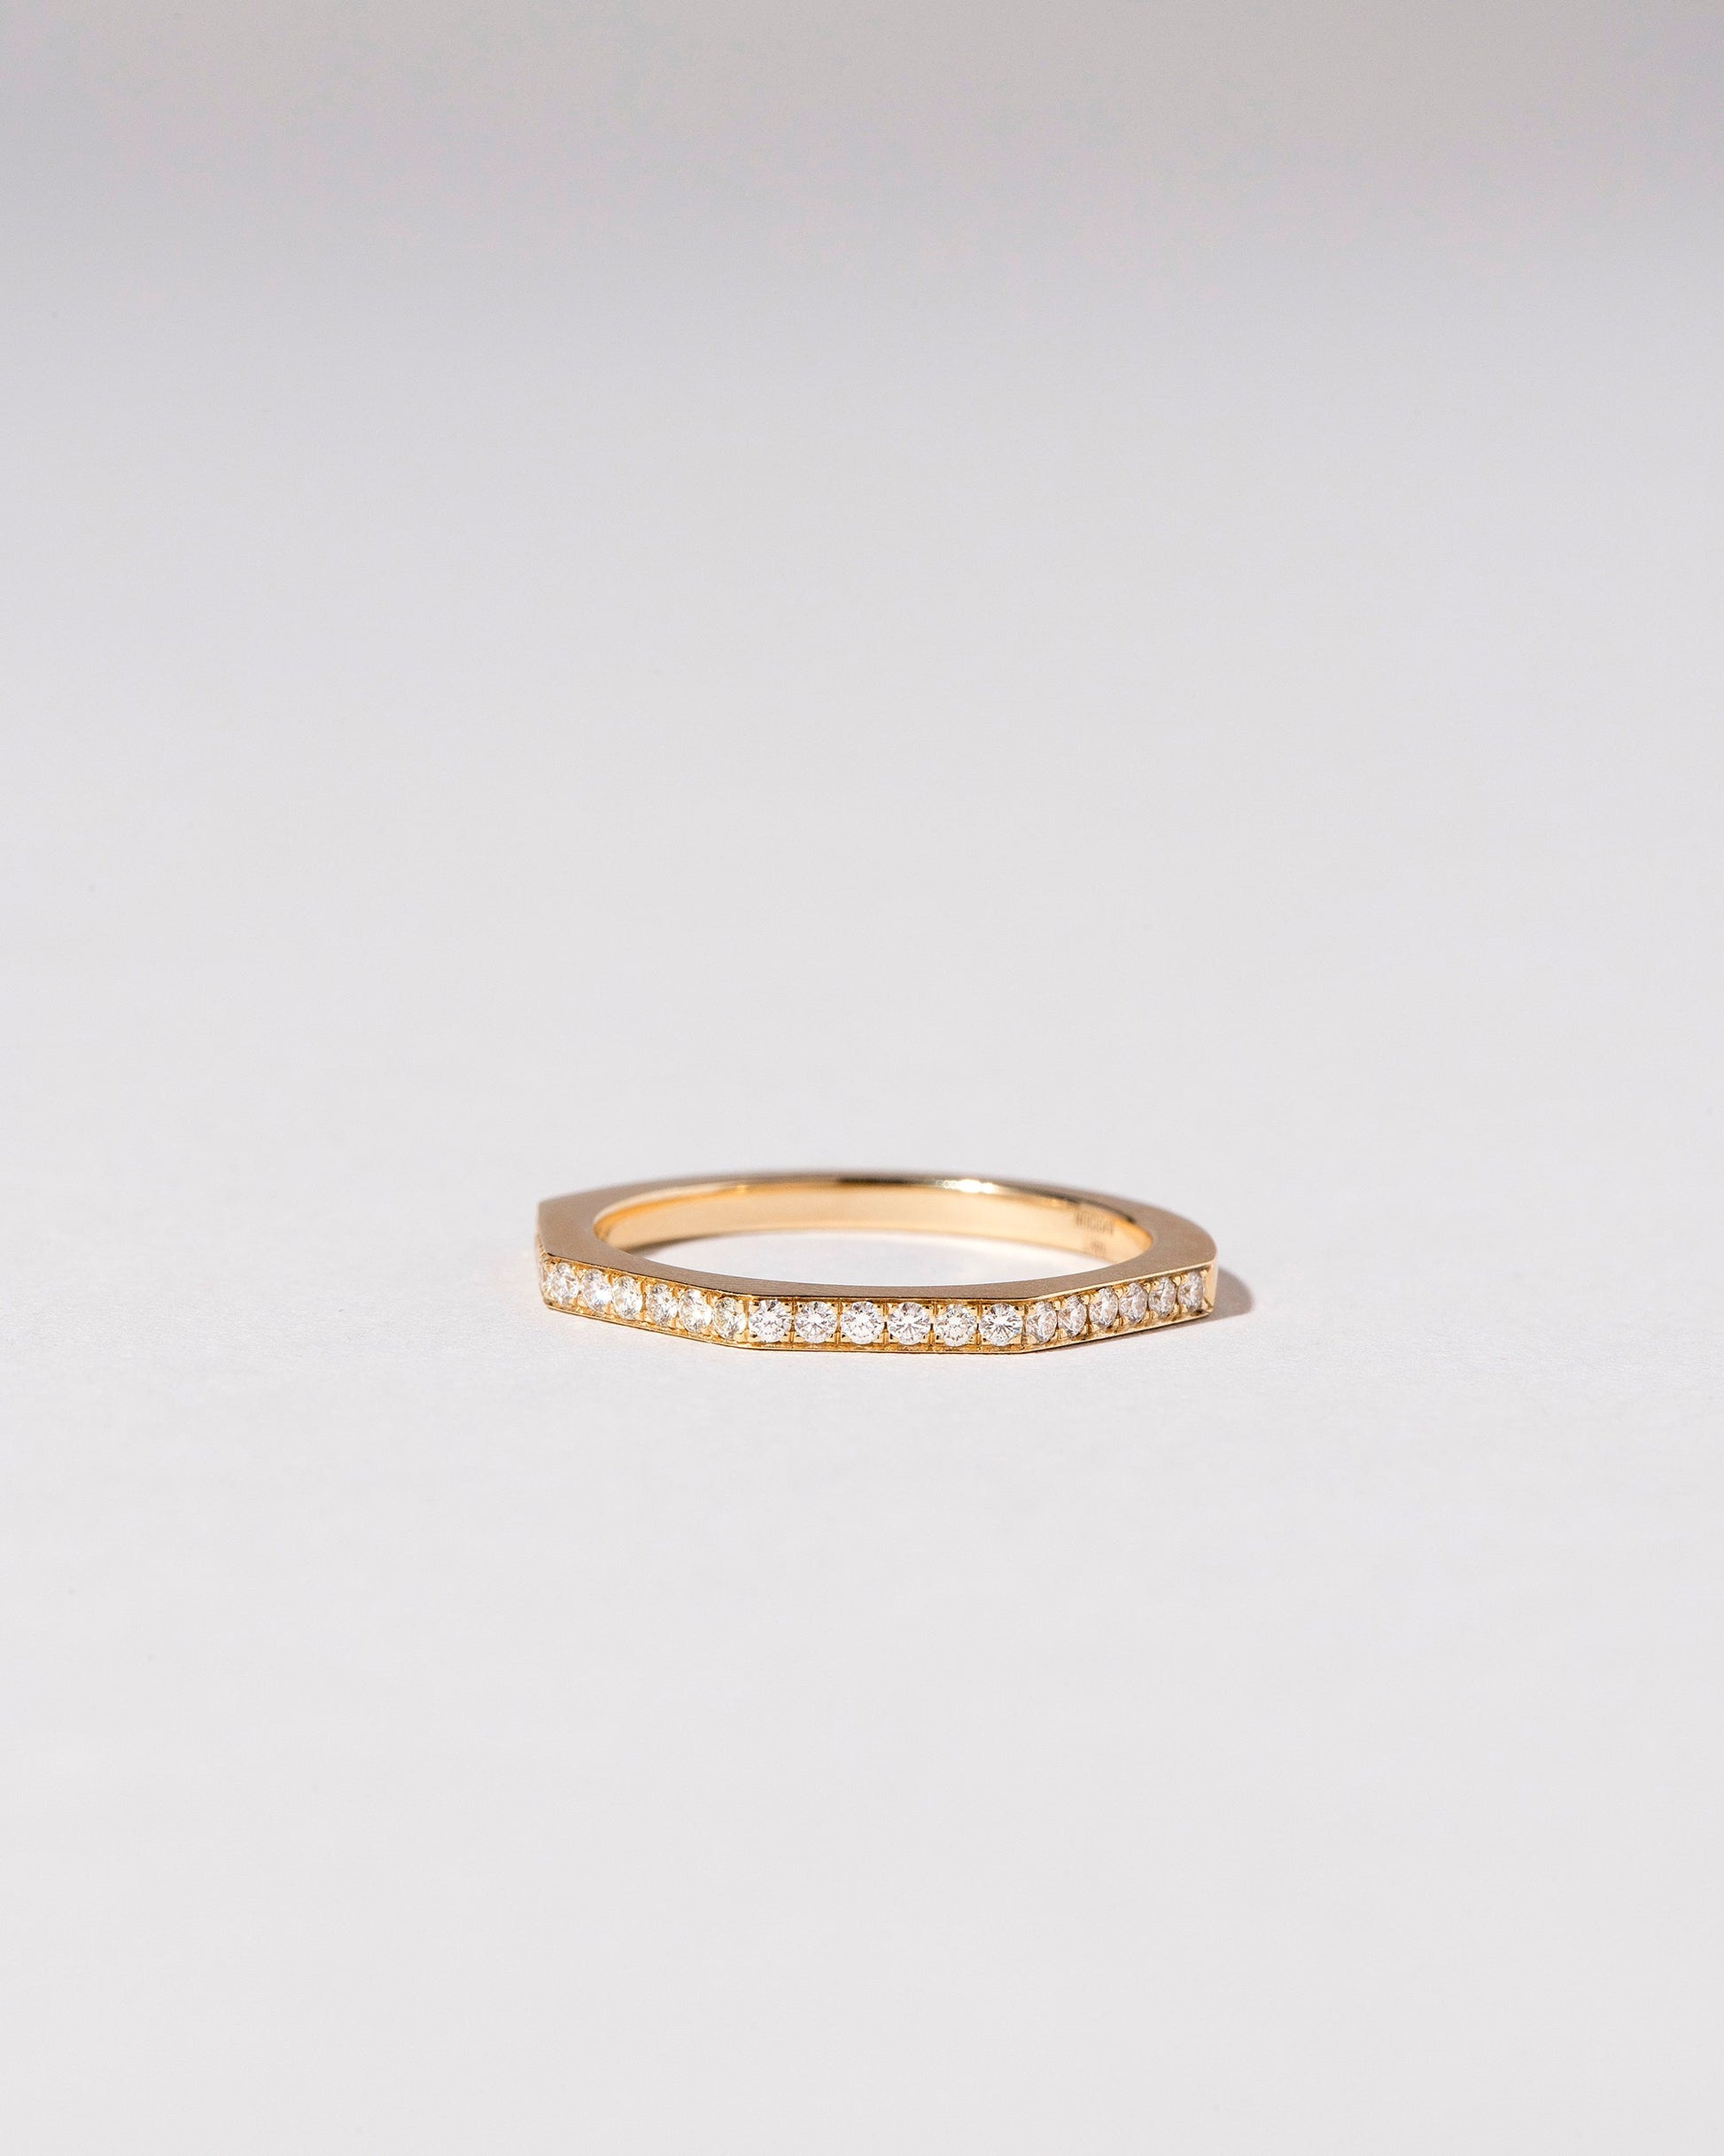  Segmented Band -  1.7mm Infinity Pavé on light color background.